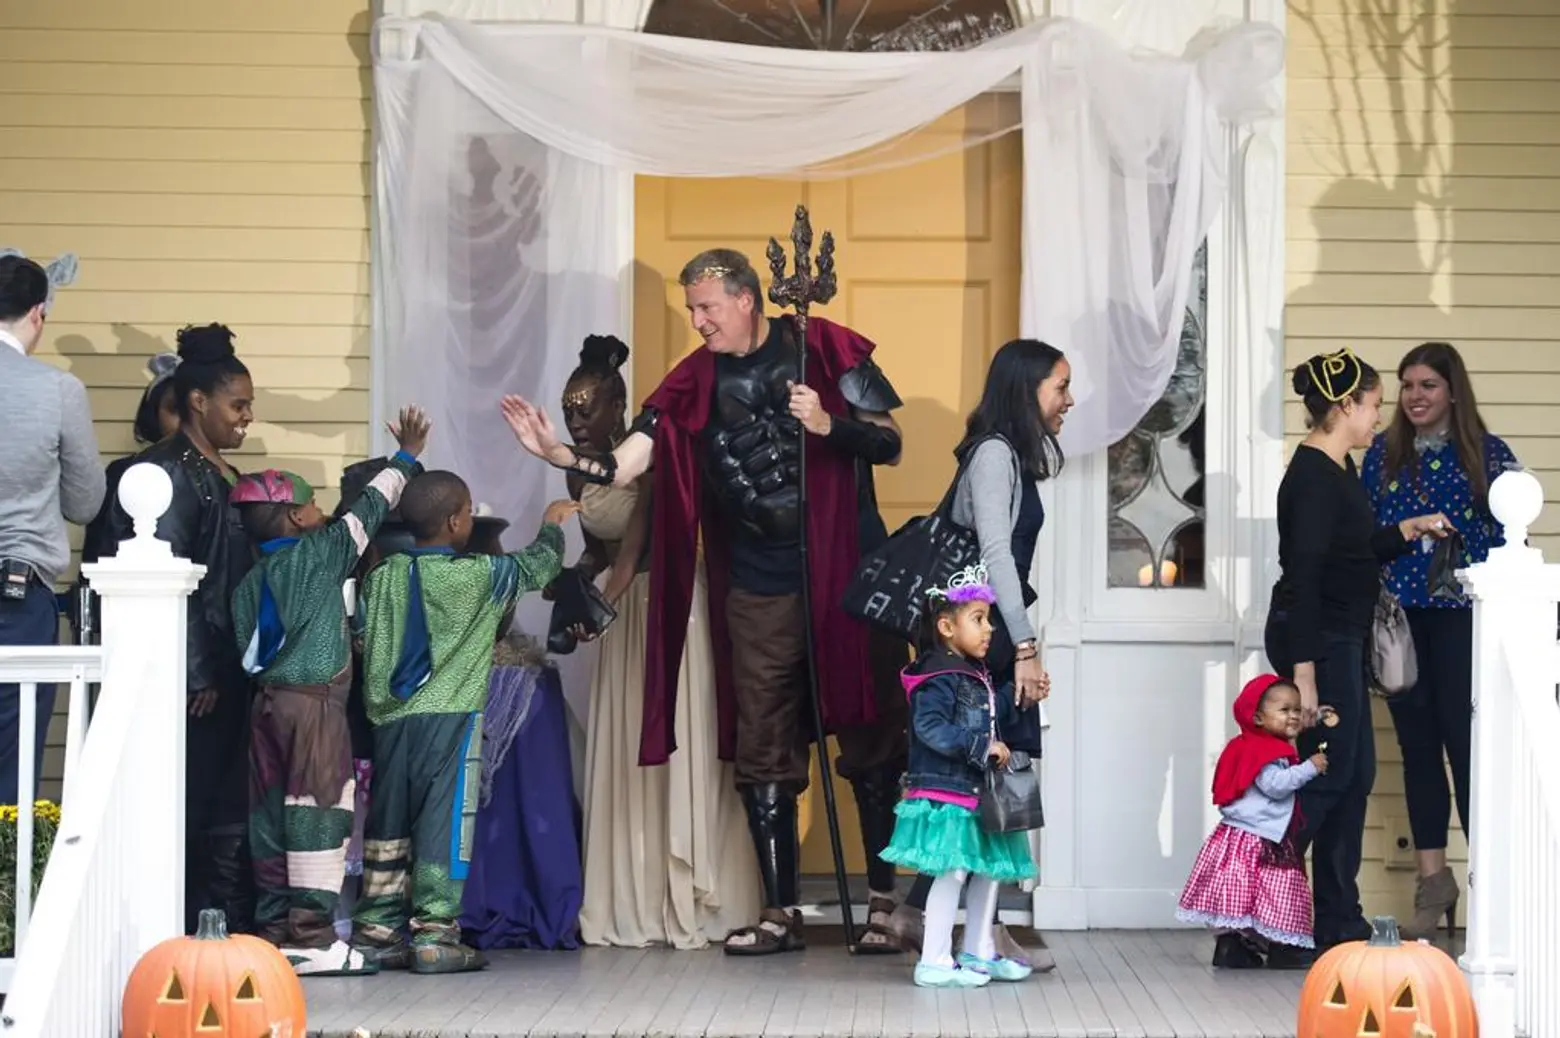 Reserve tickets to celebrate Halloween with de Blasio at Gracie Mansion